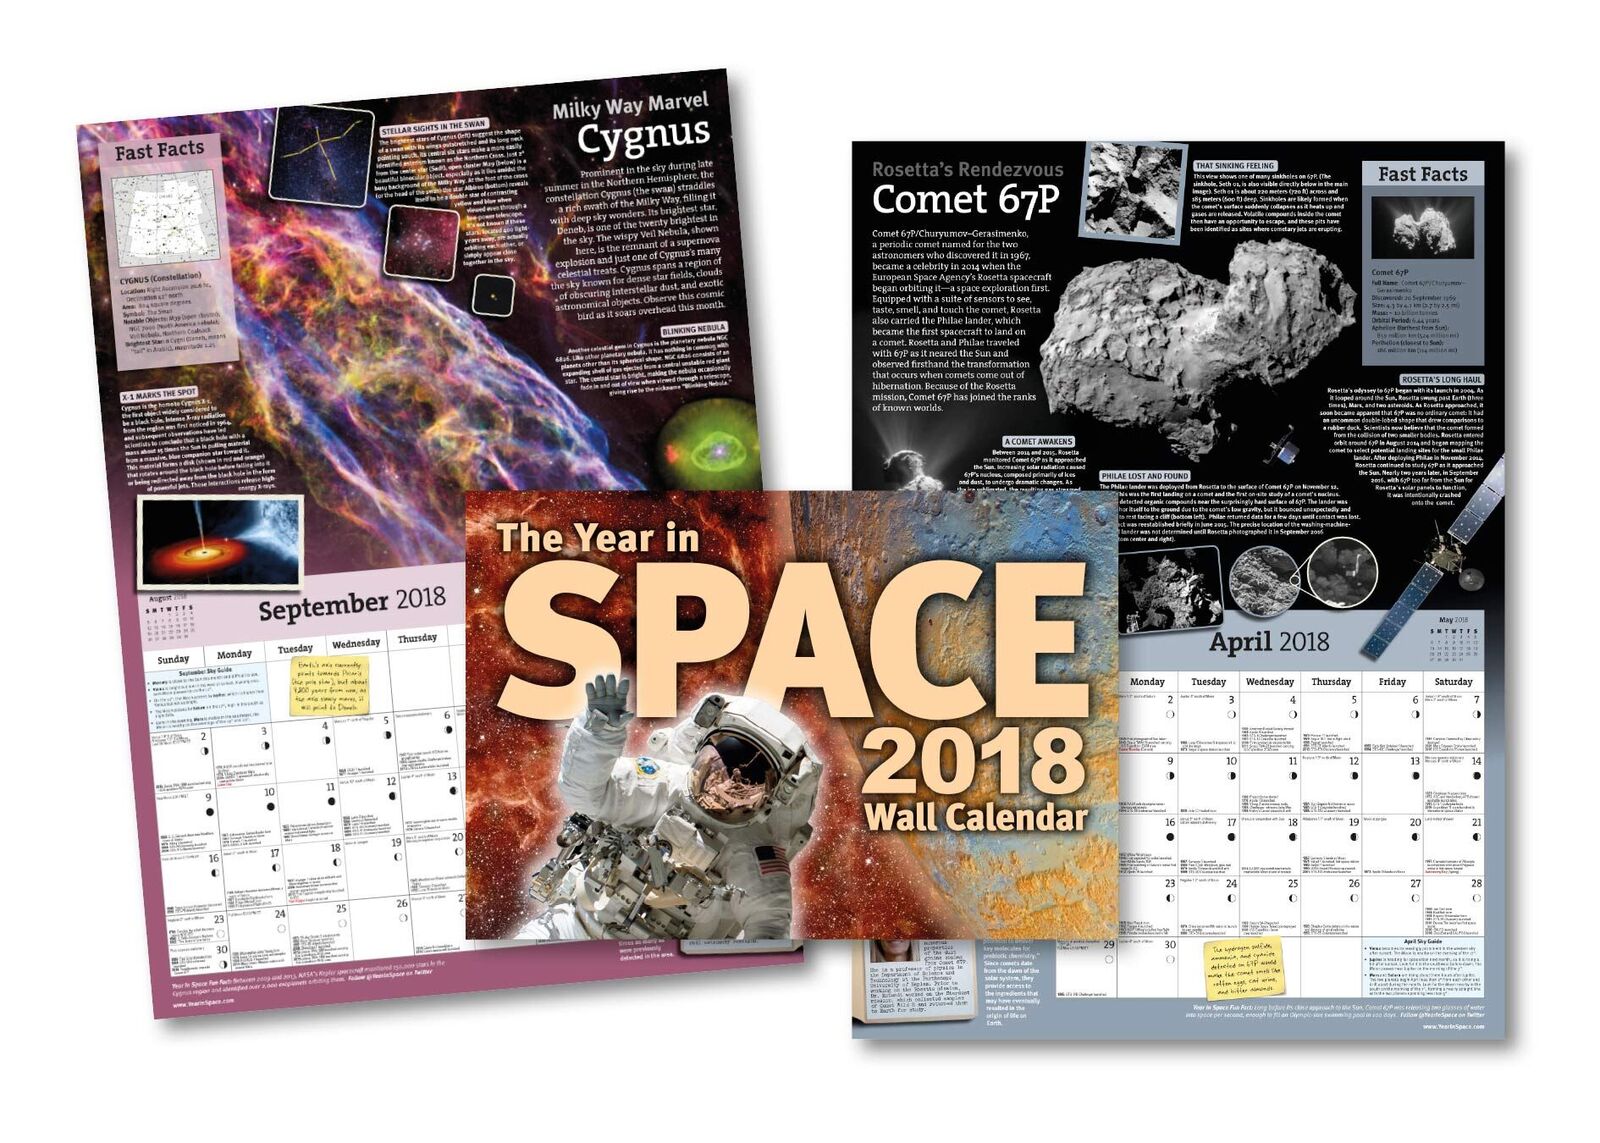 Sky Events 53 Weekly Astronomy and Space Exploration Images Space History 136 Pages Planning Calendars Daily Moon Phases The Year in Space 2019 Desk Calendar Spiral Bound 6 x 9 